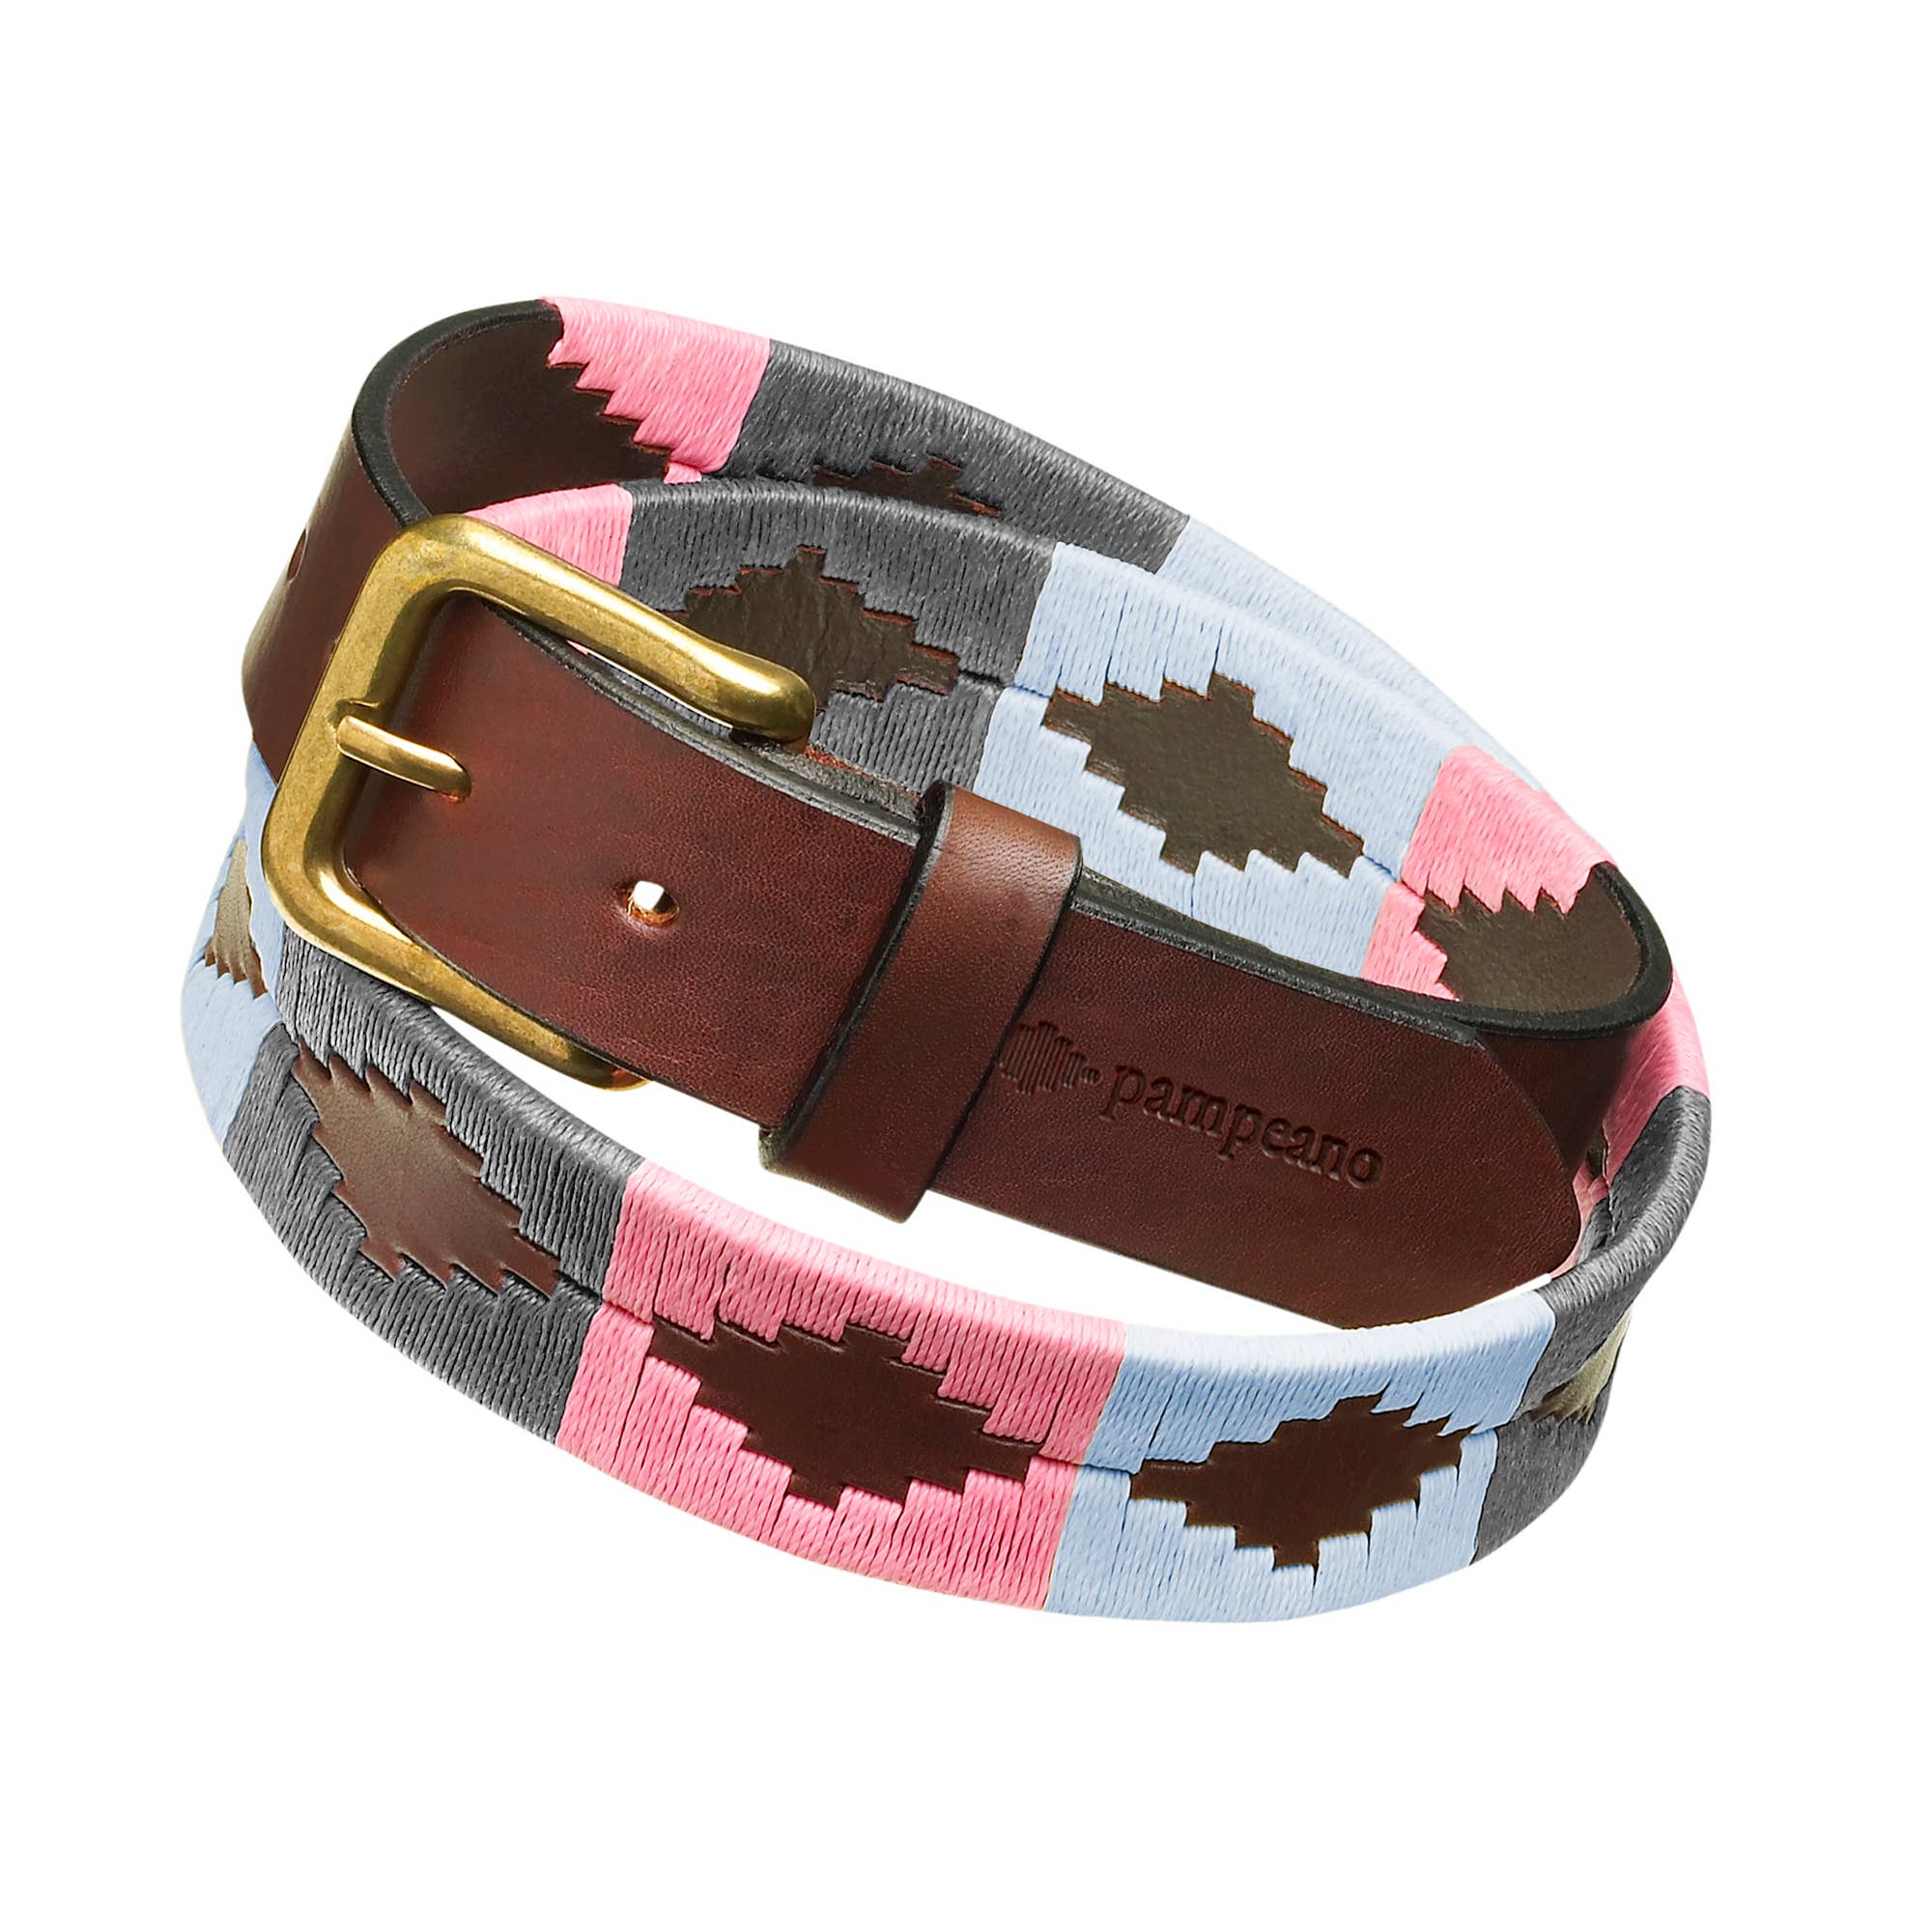 "Pampa" 100% Argentine Embroidered Leather Polo Belt The Best Quality 